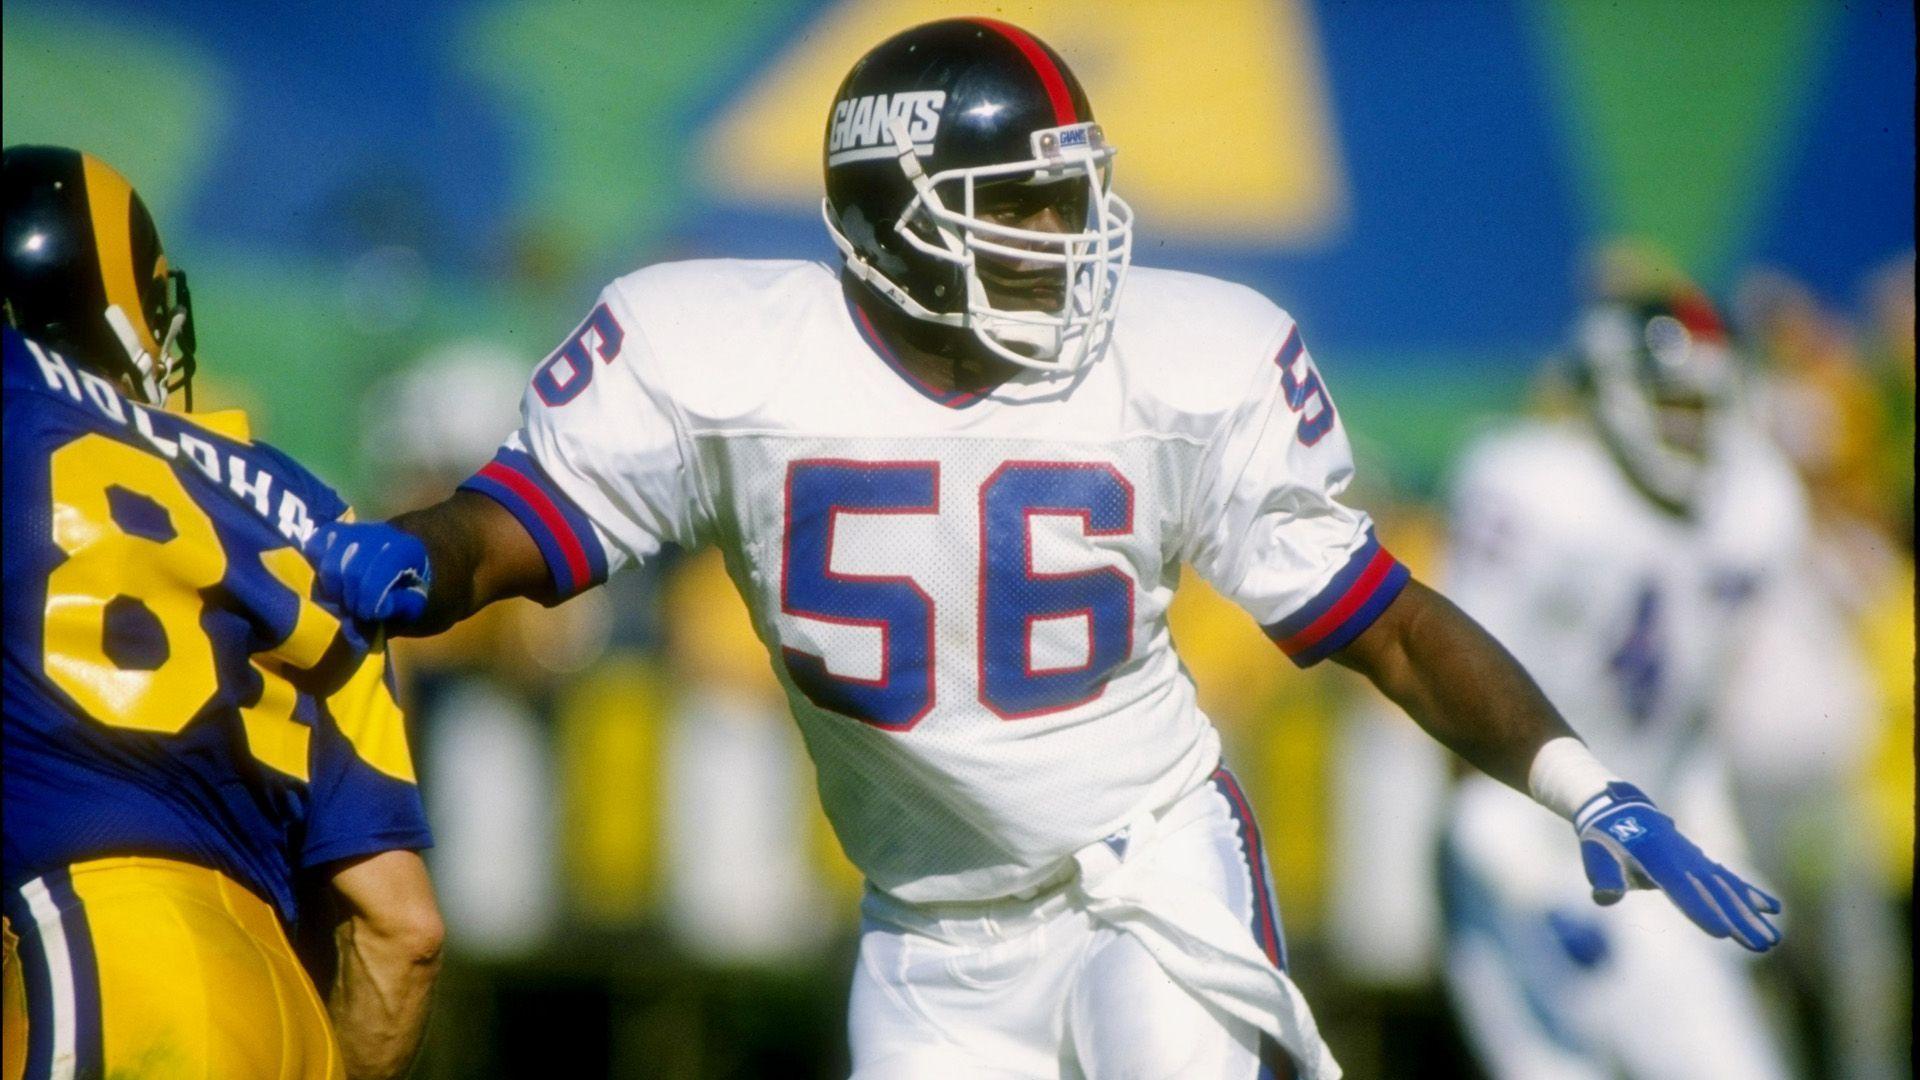 Lawrence Taylor. Sports. Nfl history, NFL and Football